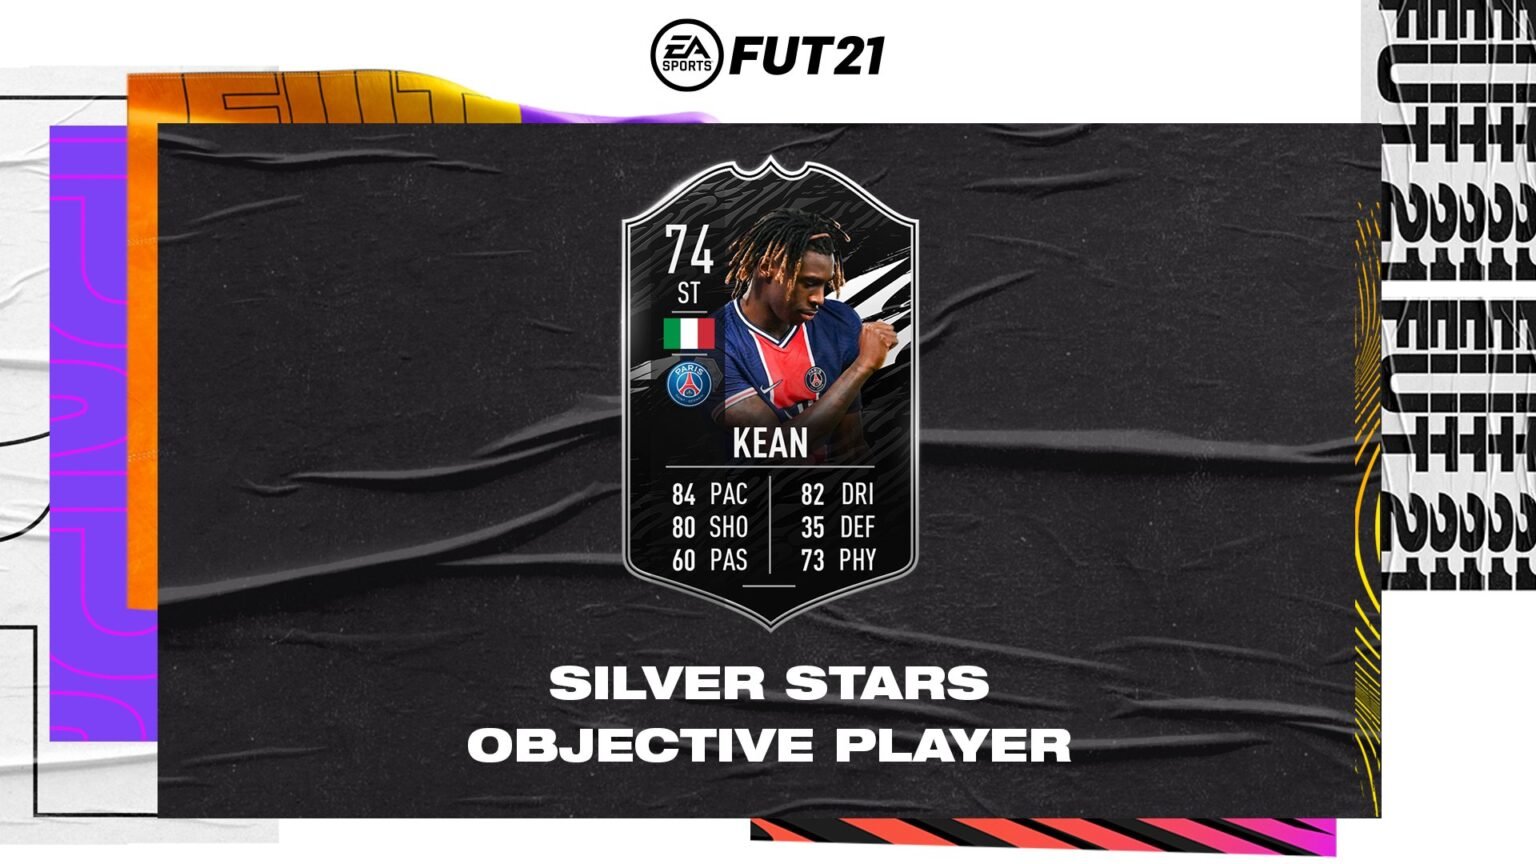 FIFA 21: Requirements for Moise Kean Silver Stars card in Season